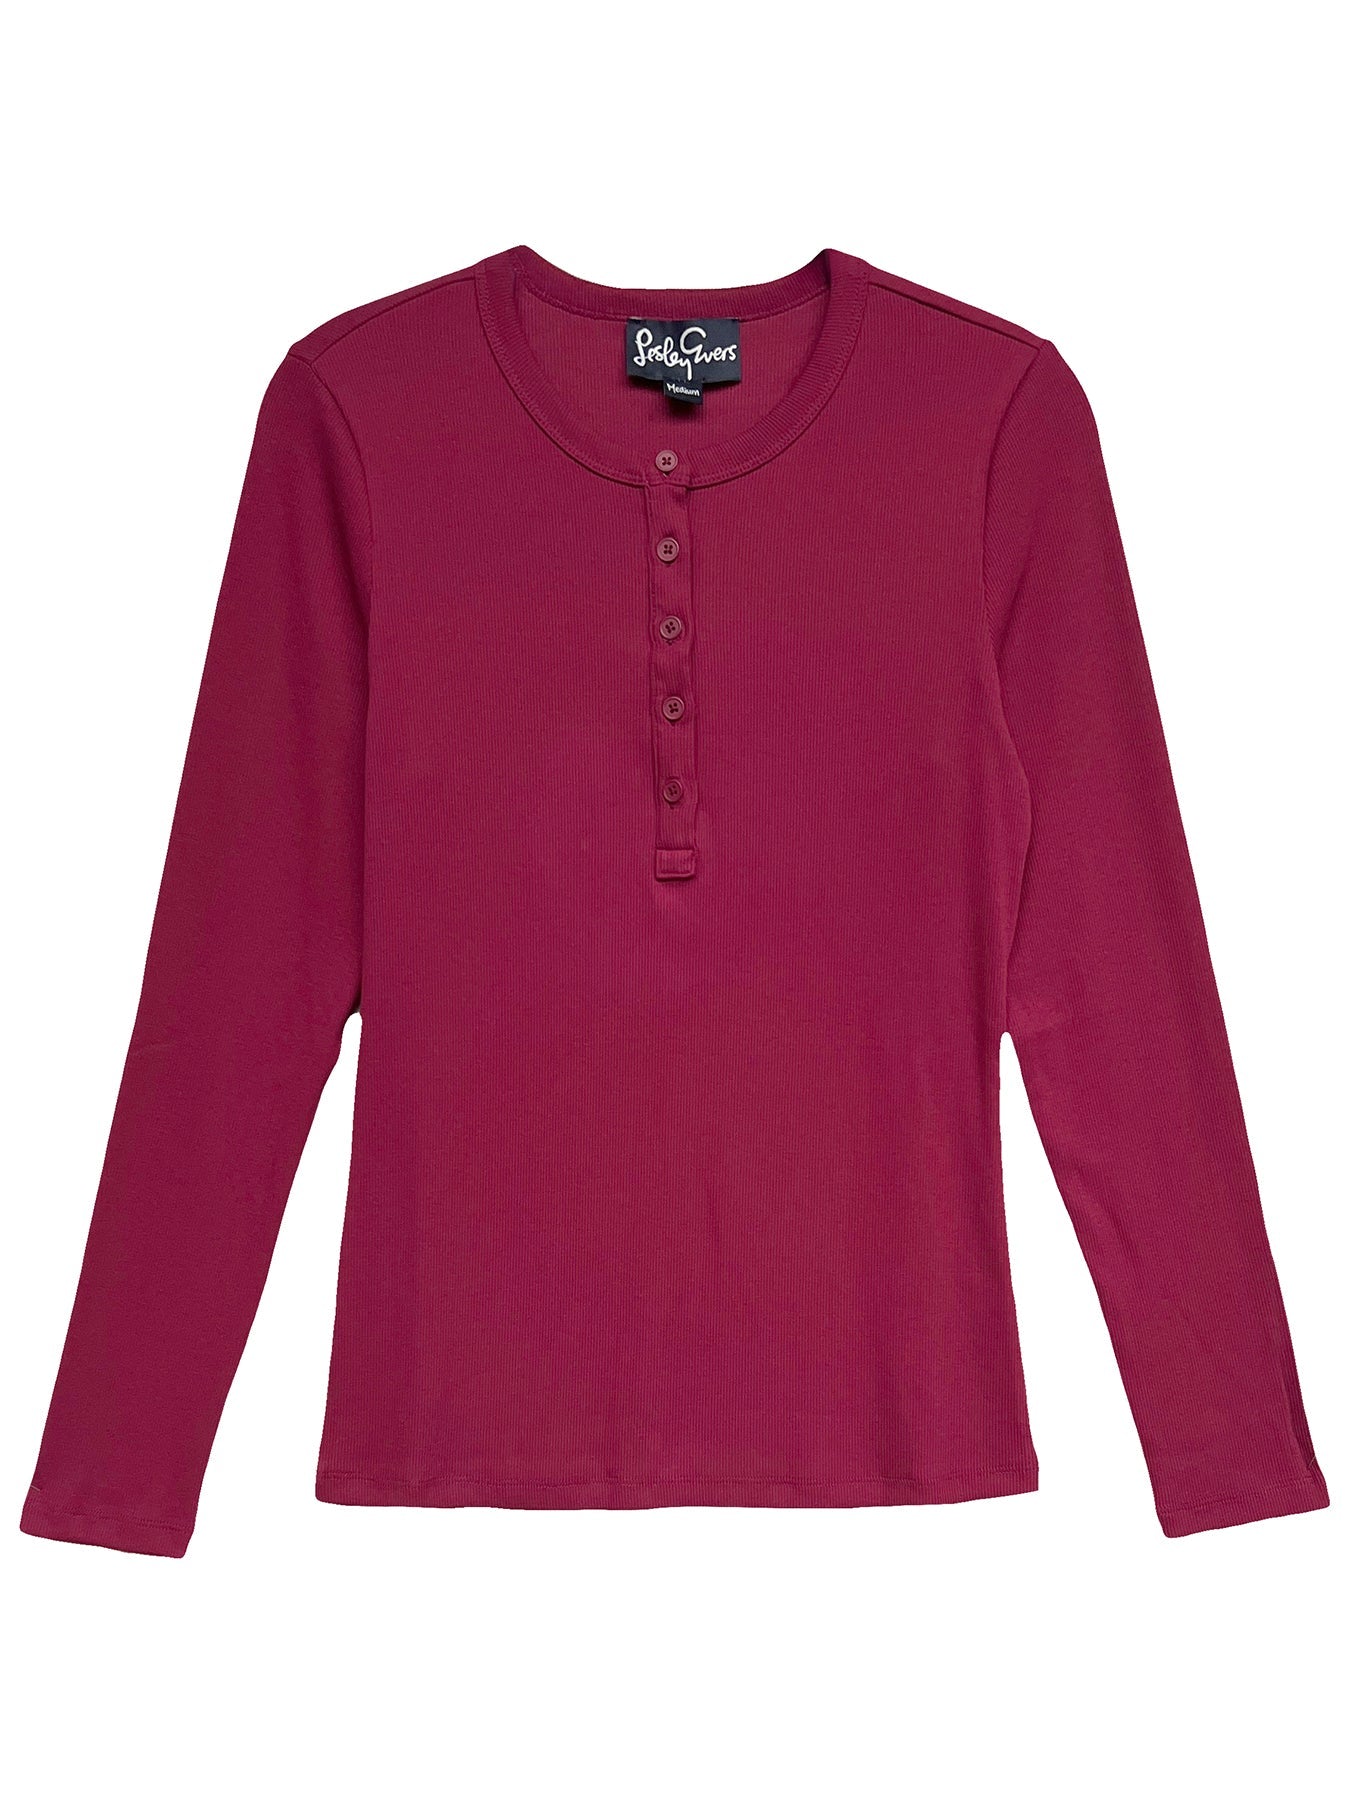 CORA henley tee Burgundy Rib - Lesley Evers-Best Seller-Shop-Shop/All Products